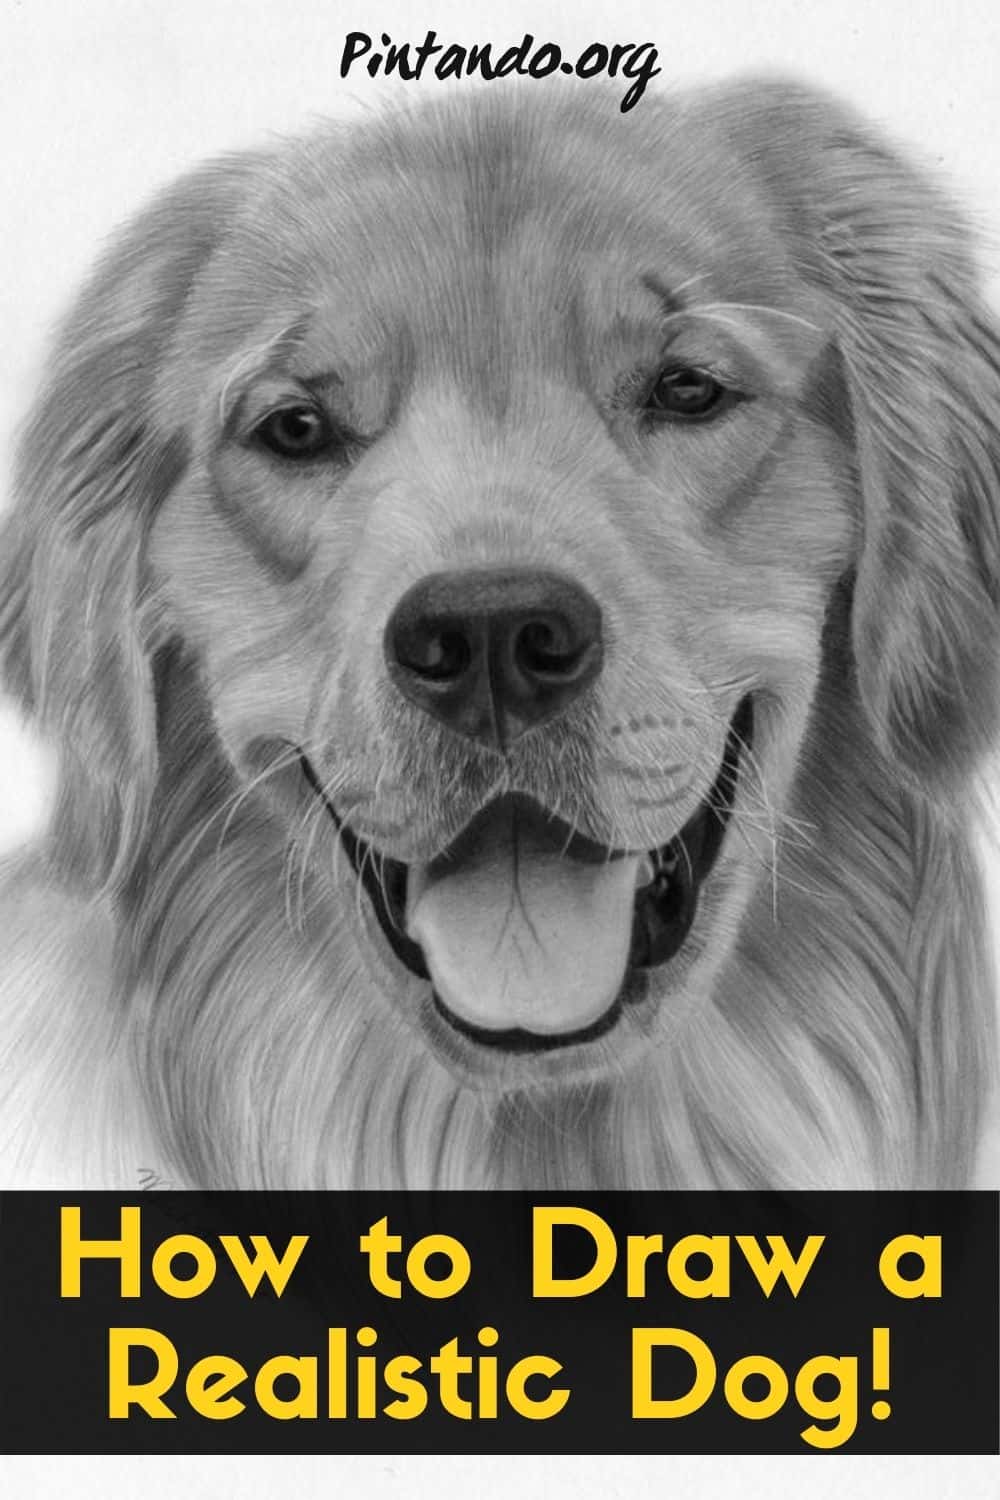 How to Draw a Realistic Dog!